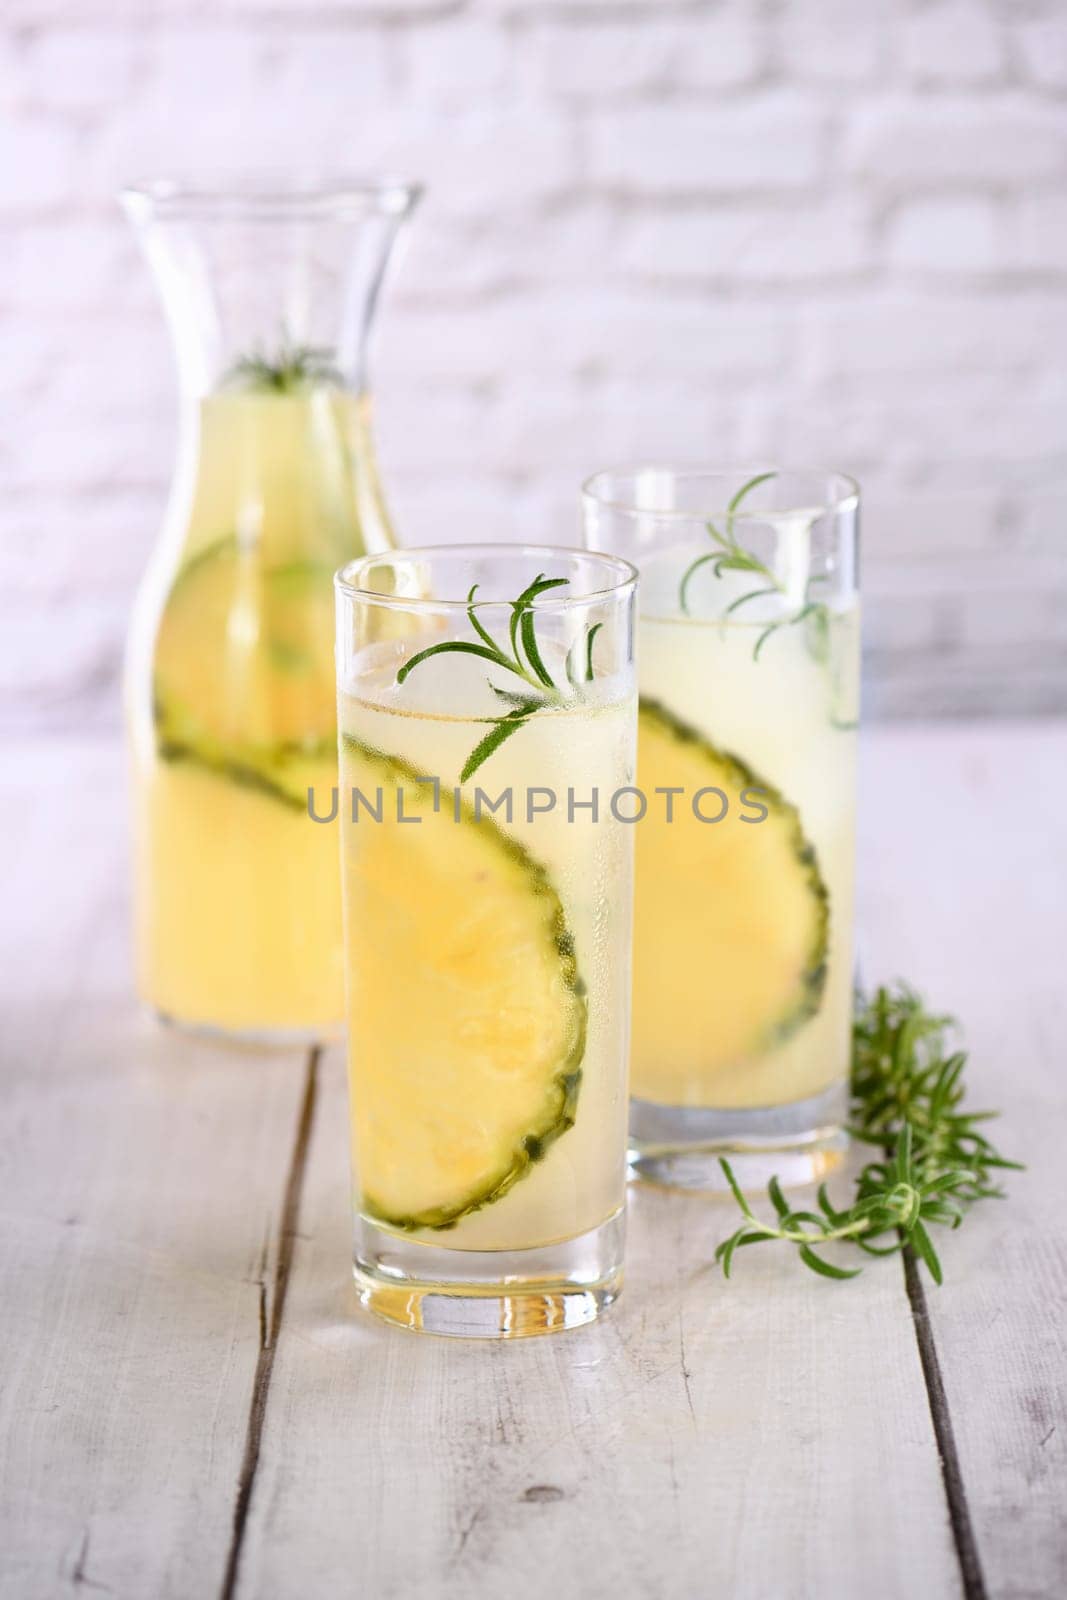 A glass of lemonade with pineapple pieces, ice cubes and rosemary. Cold refreshment organic non-alcohol cocktail.